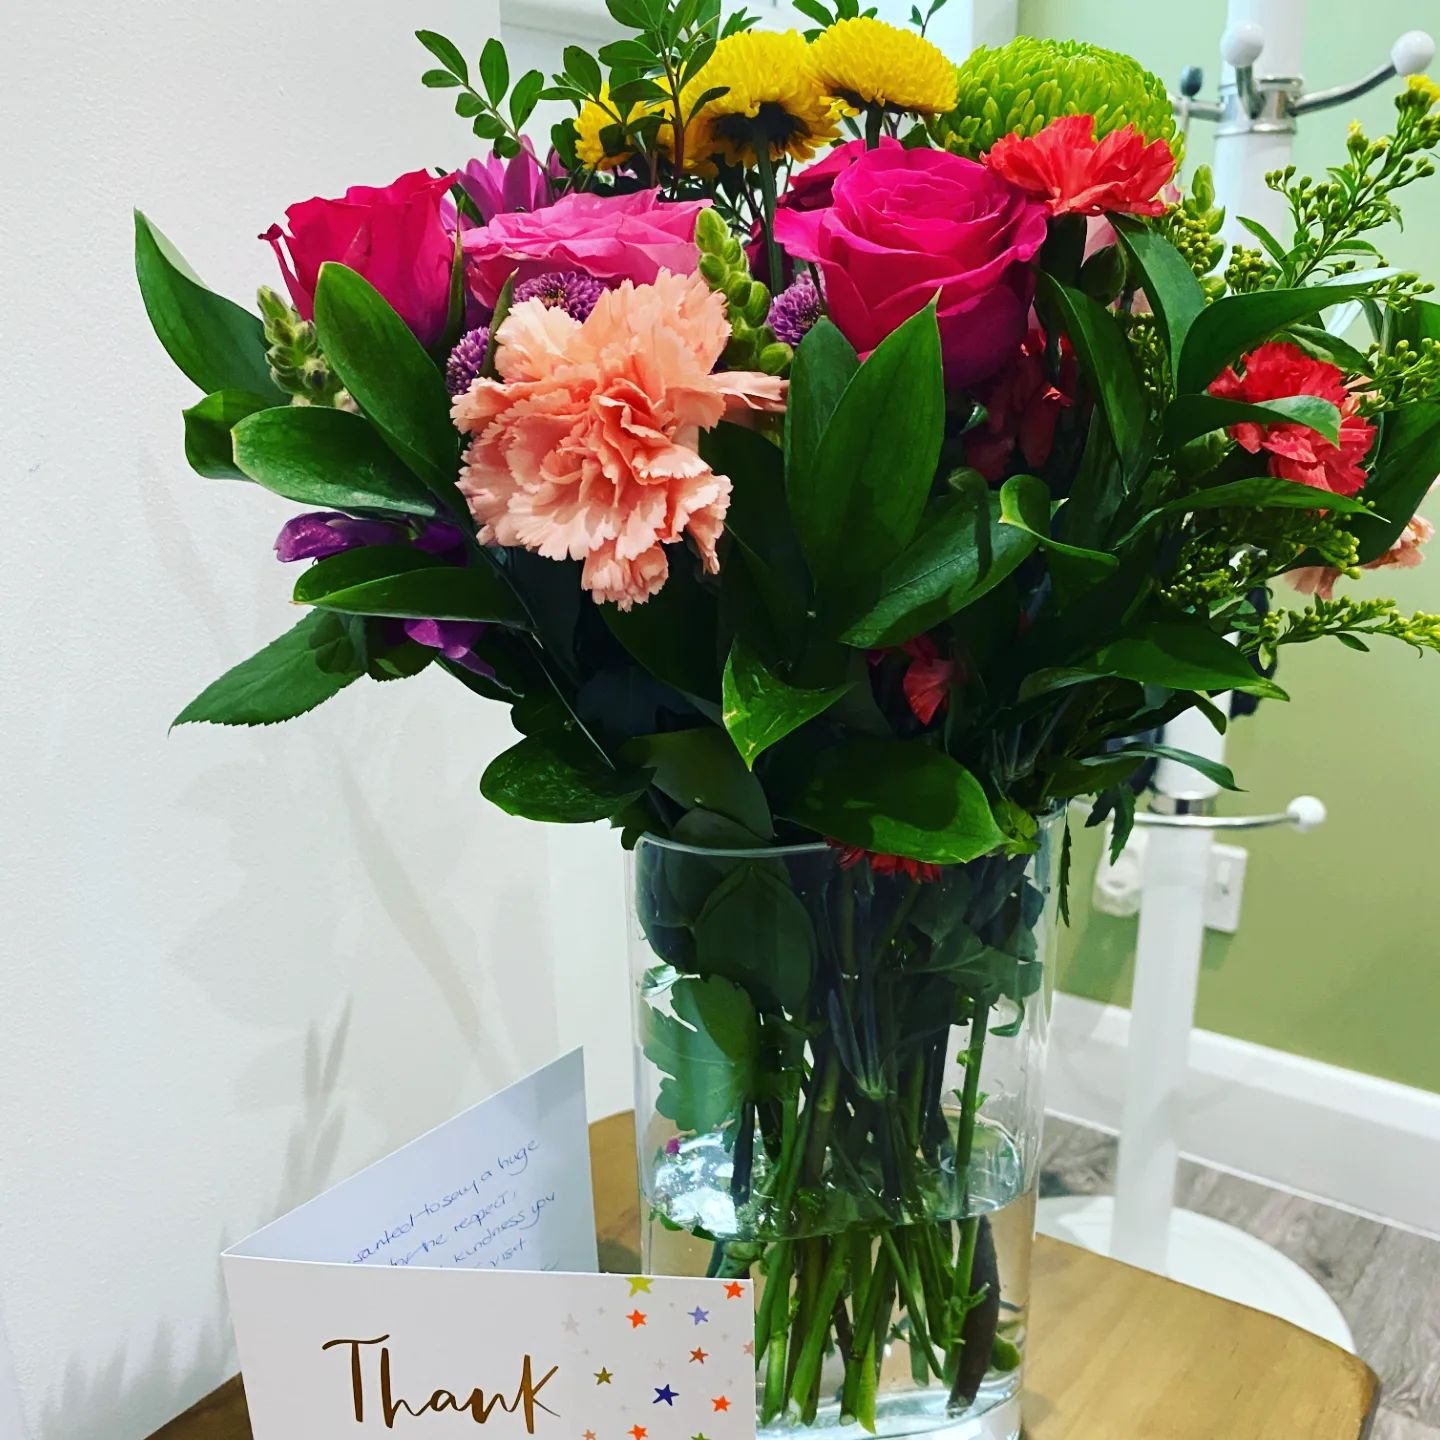 Feeling incredibly grateful today! A huge thank you to our wonderful patient for the beautiful flowers &ndash; your thoughtfulness brightened our day! 🌸 And to our amazing team, your dedication and compassion make all the difference. Together, we're